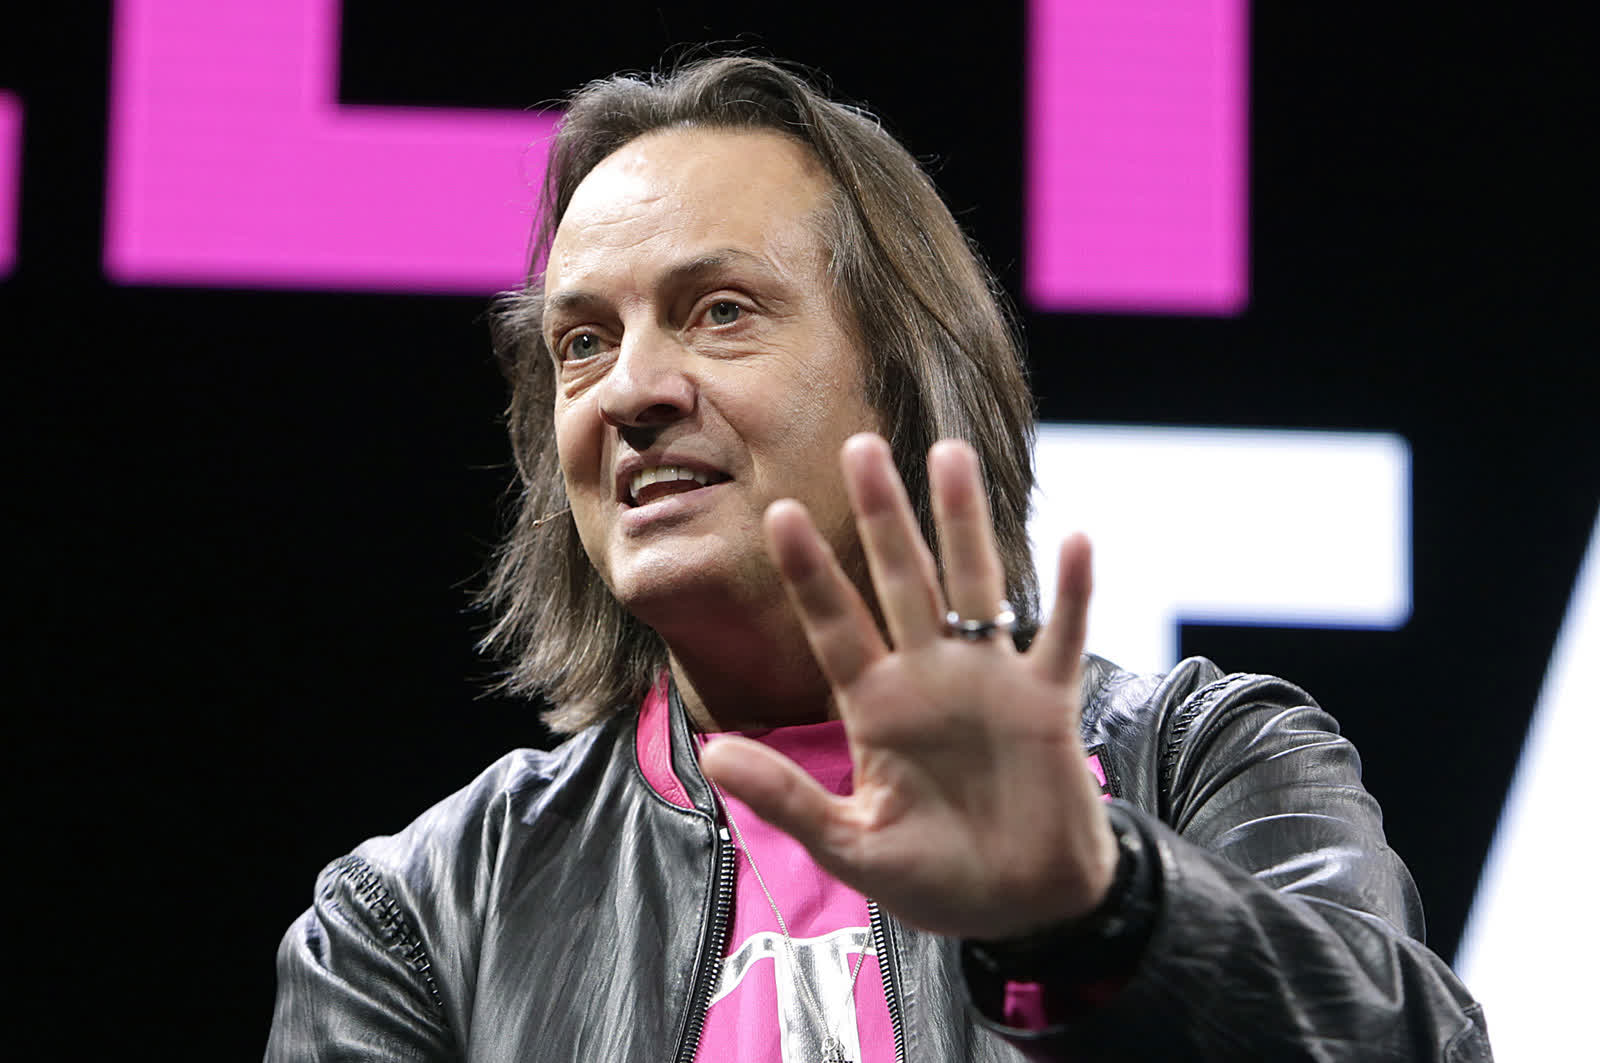 John Legere left T-Mobile with a severance package of over $136 million